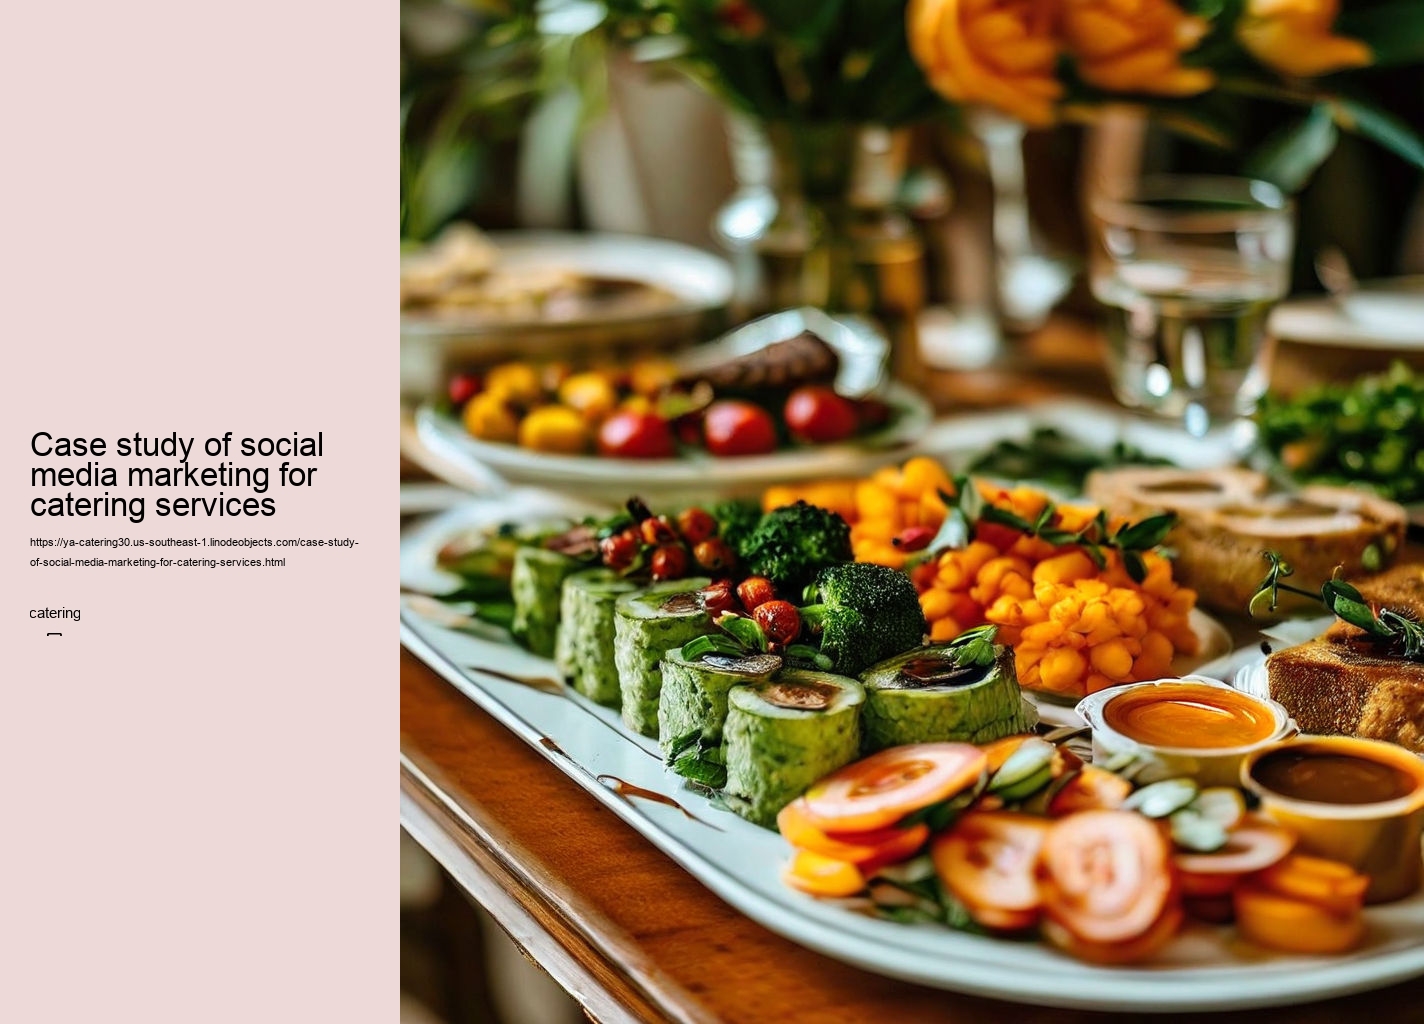 Case study of social media marketing for catering services